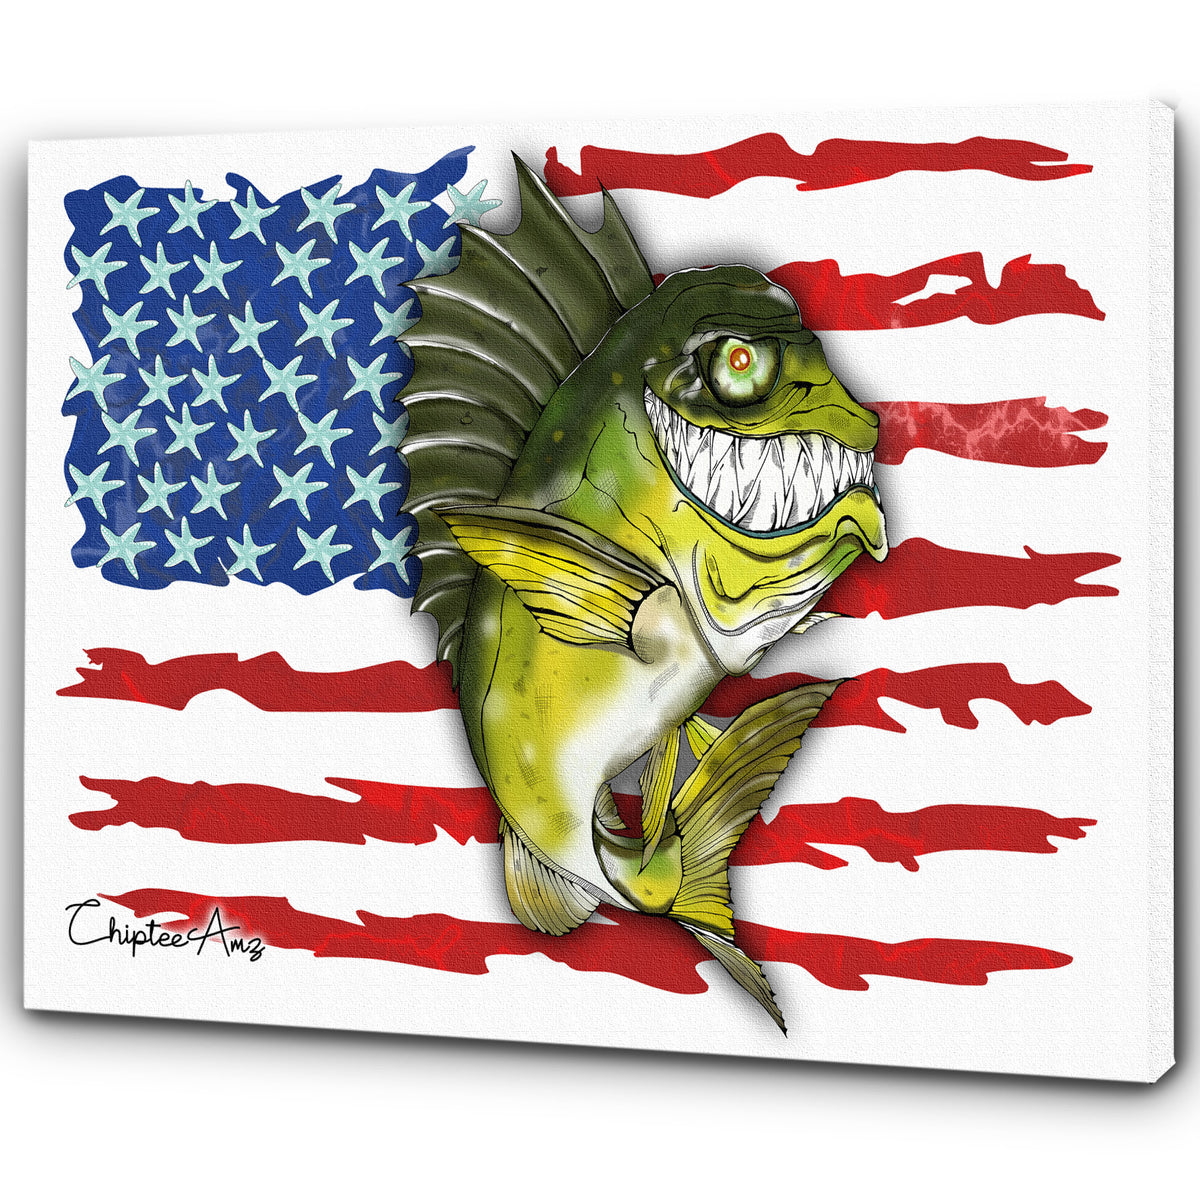 Largemouth Bass fishing with American flag ChipteeAmz's art Matte